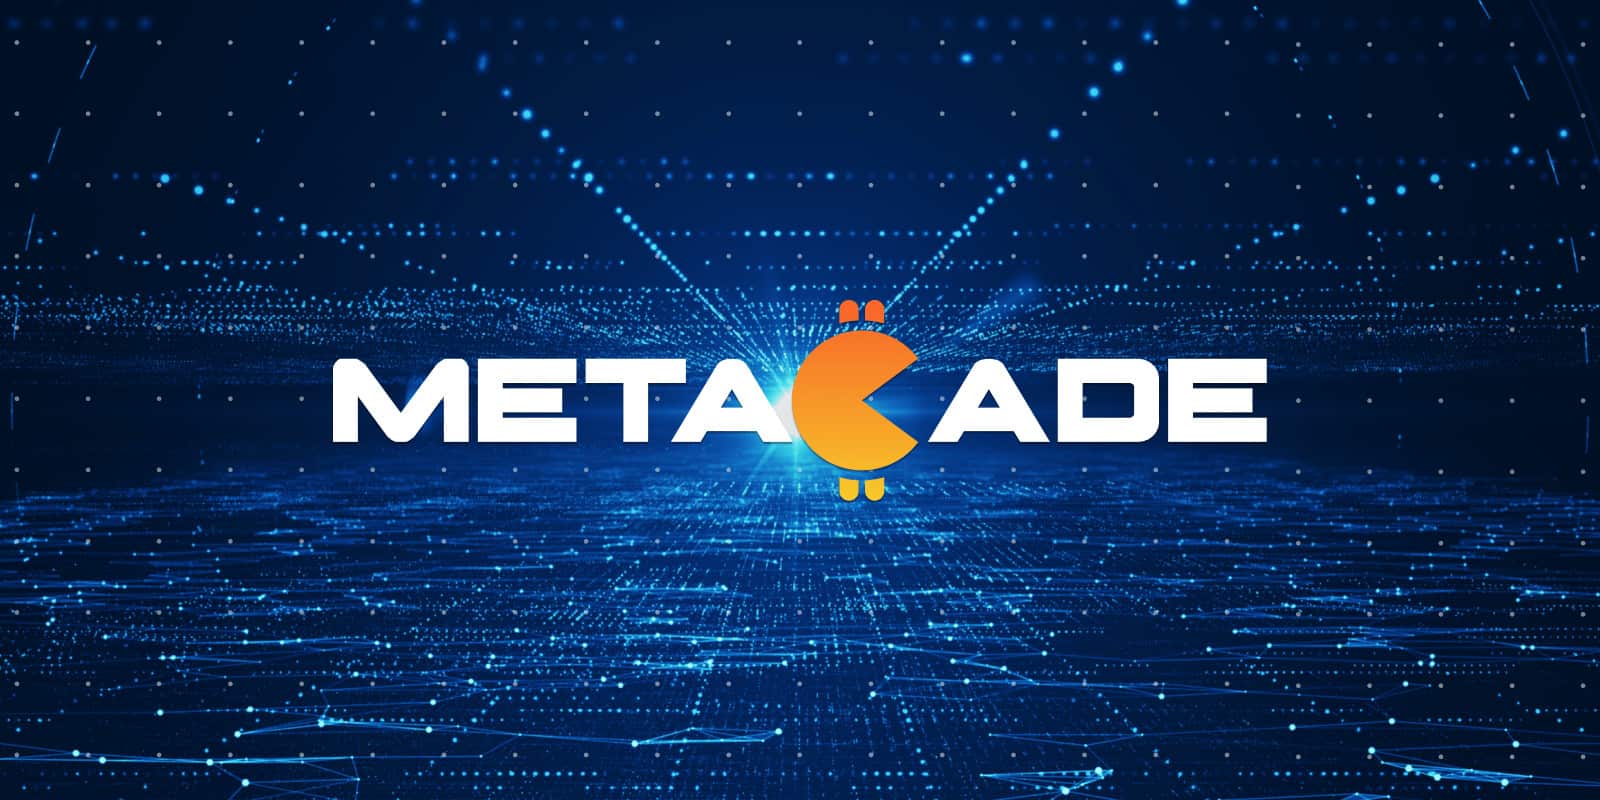 Metacade-provides-update-on-its-presale-as-it-passes-$2-million